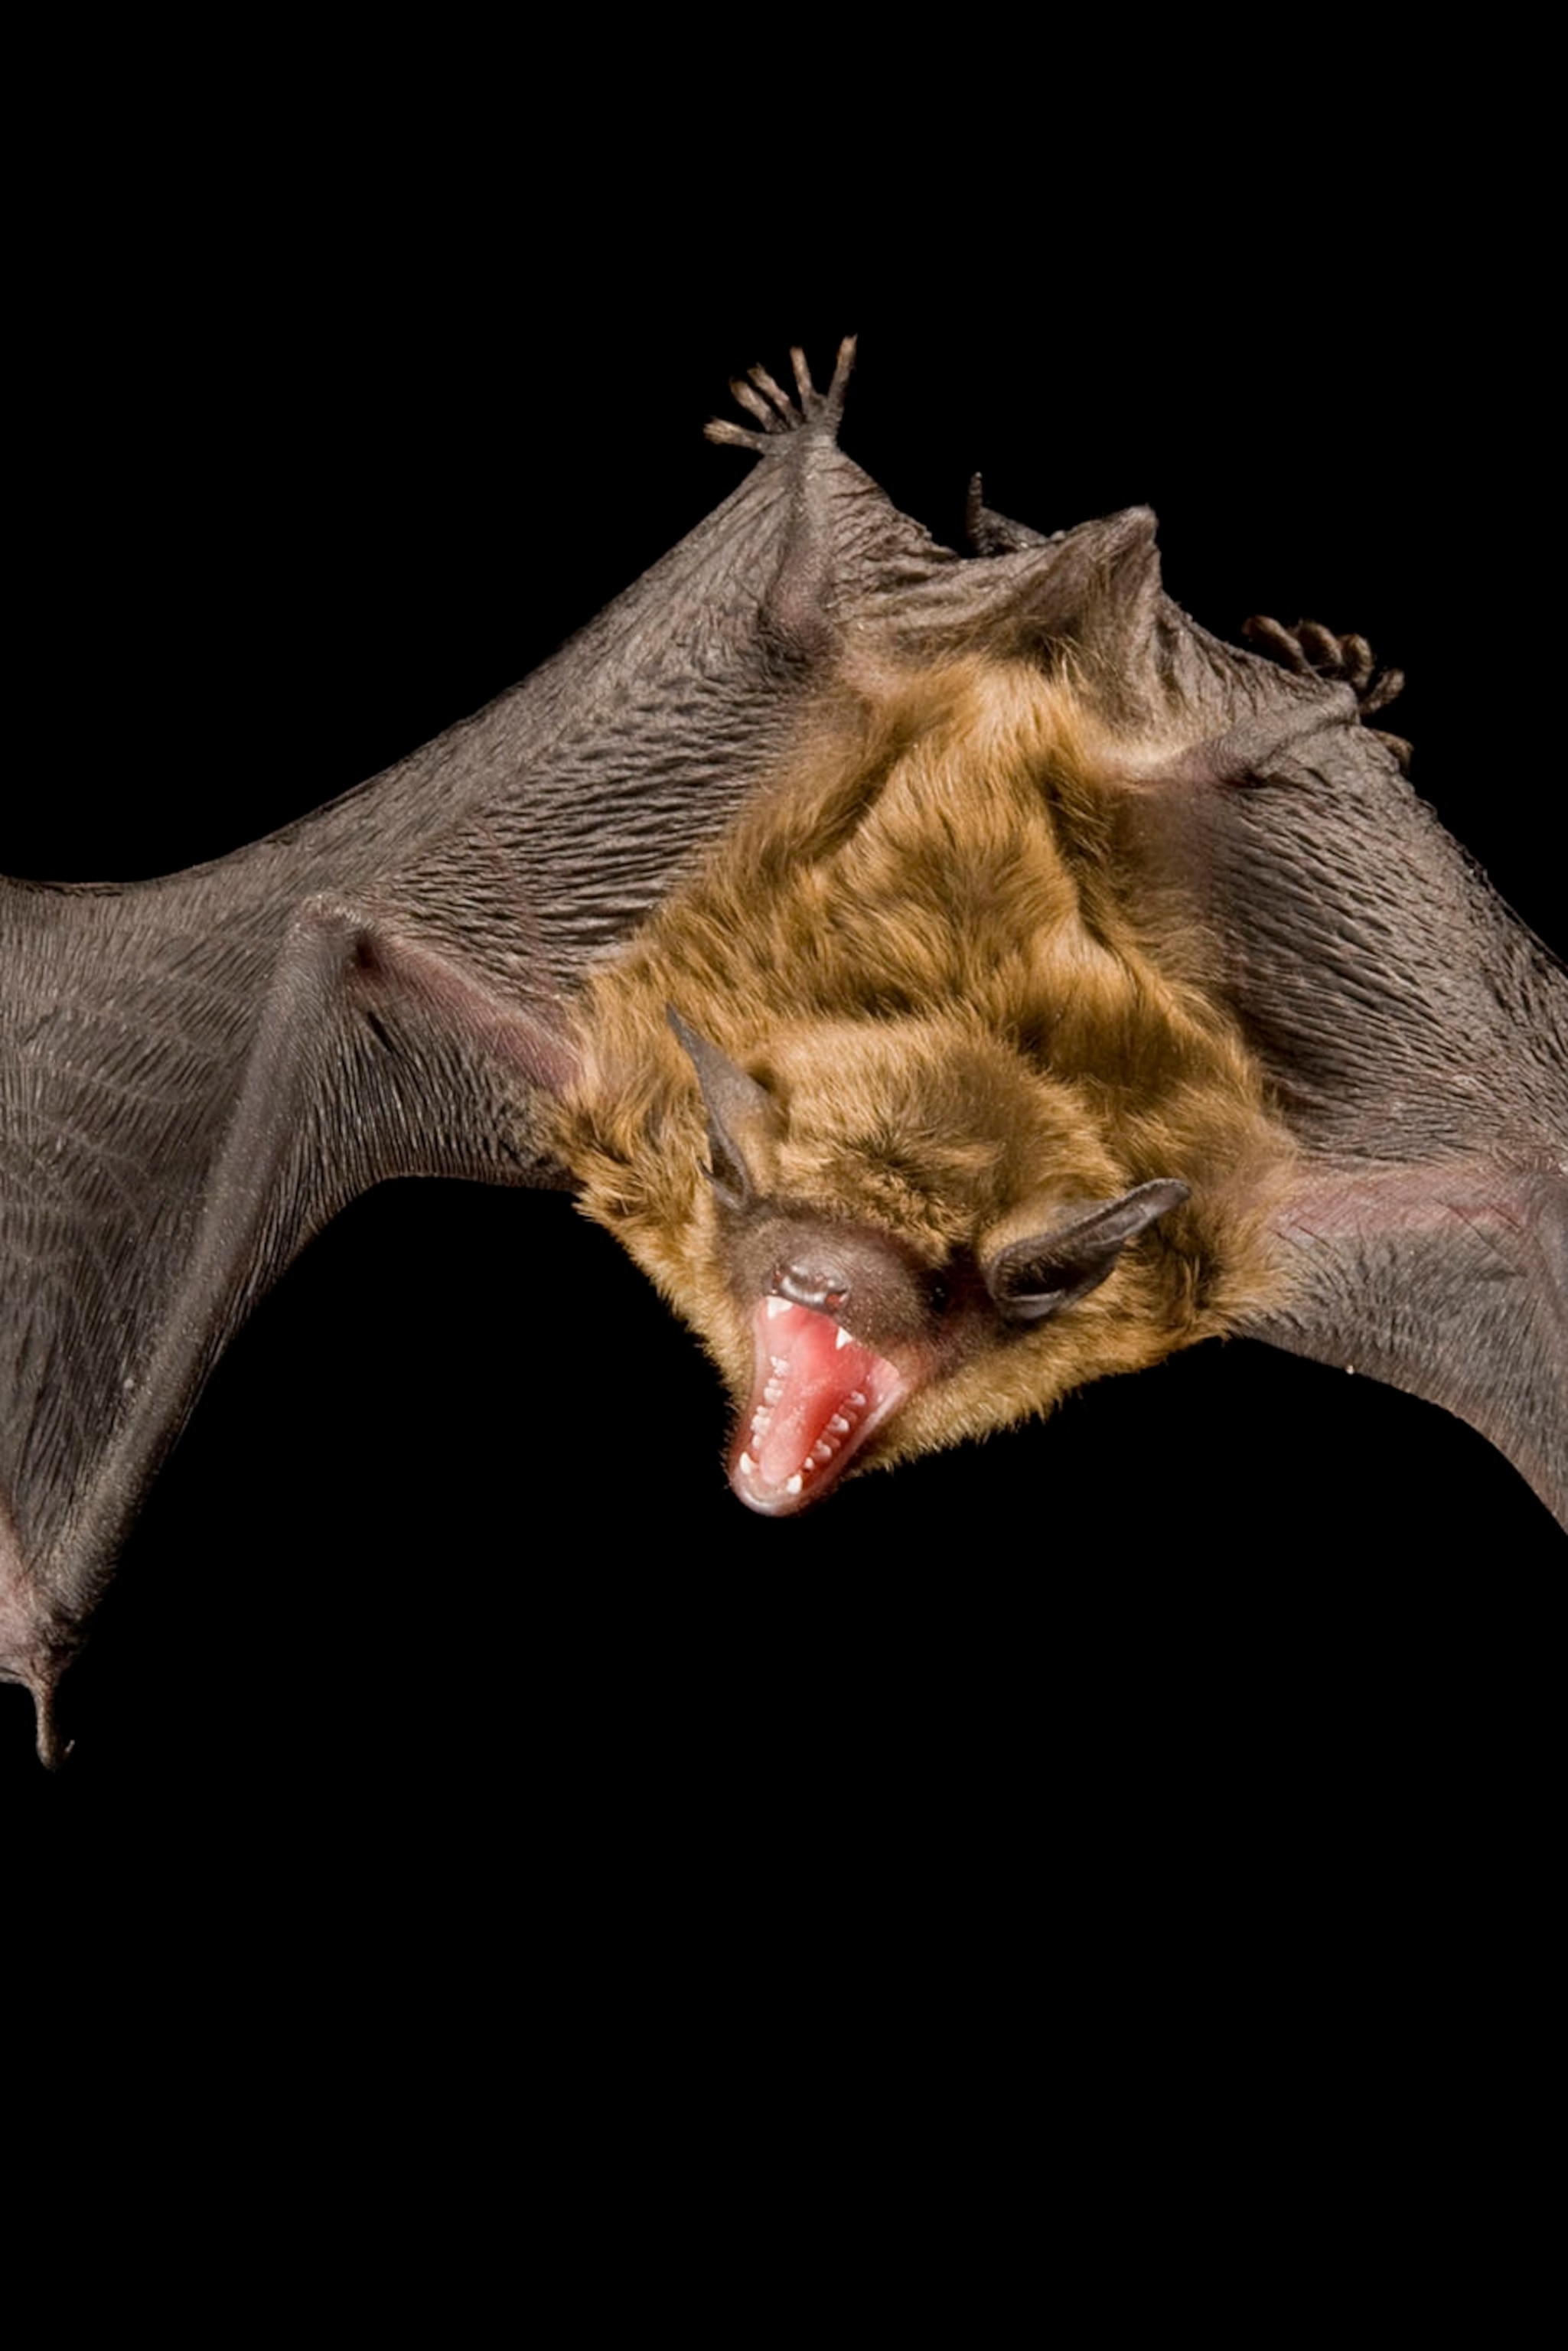 Bats, facts and photo